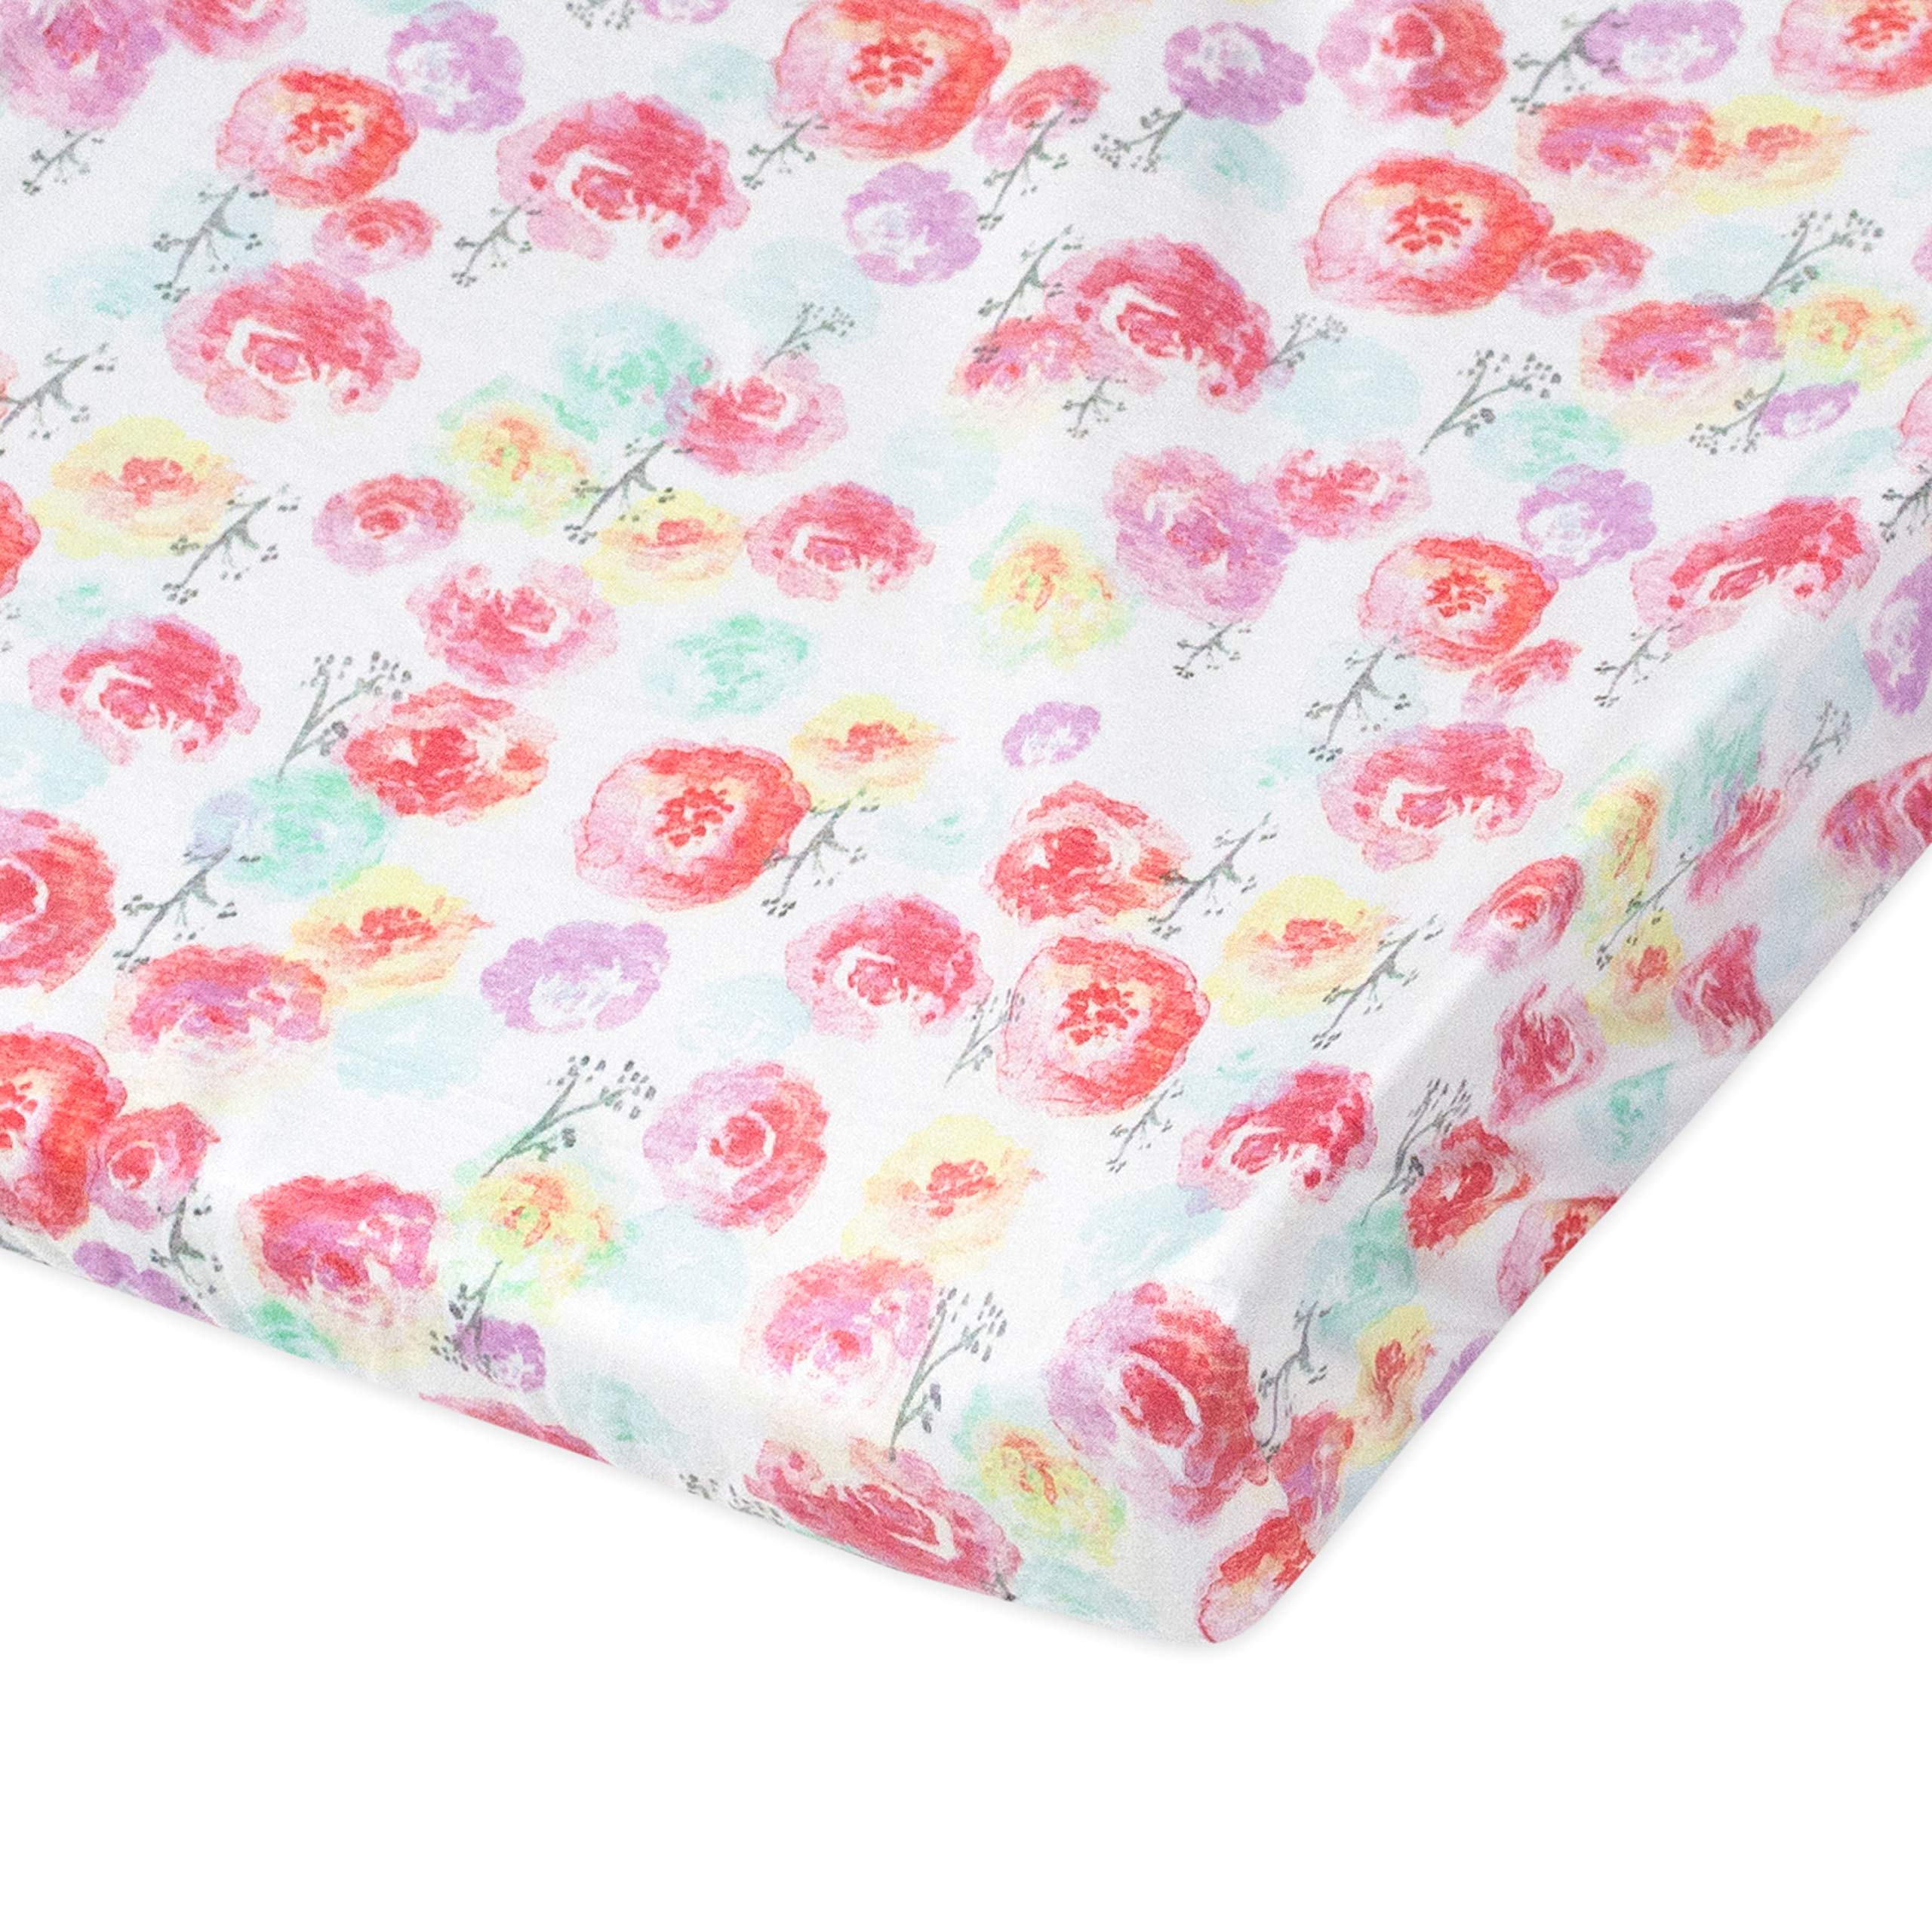 HonestBaby Organic Cotton Changing Pad Covers (Set of Two), Rose Blossom/Pink, One Size